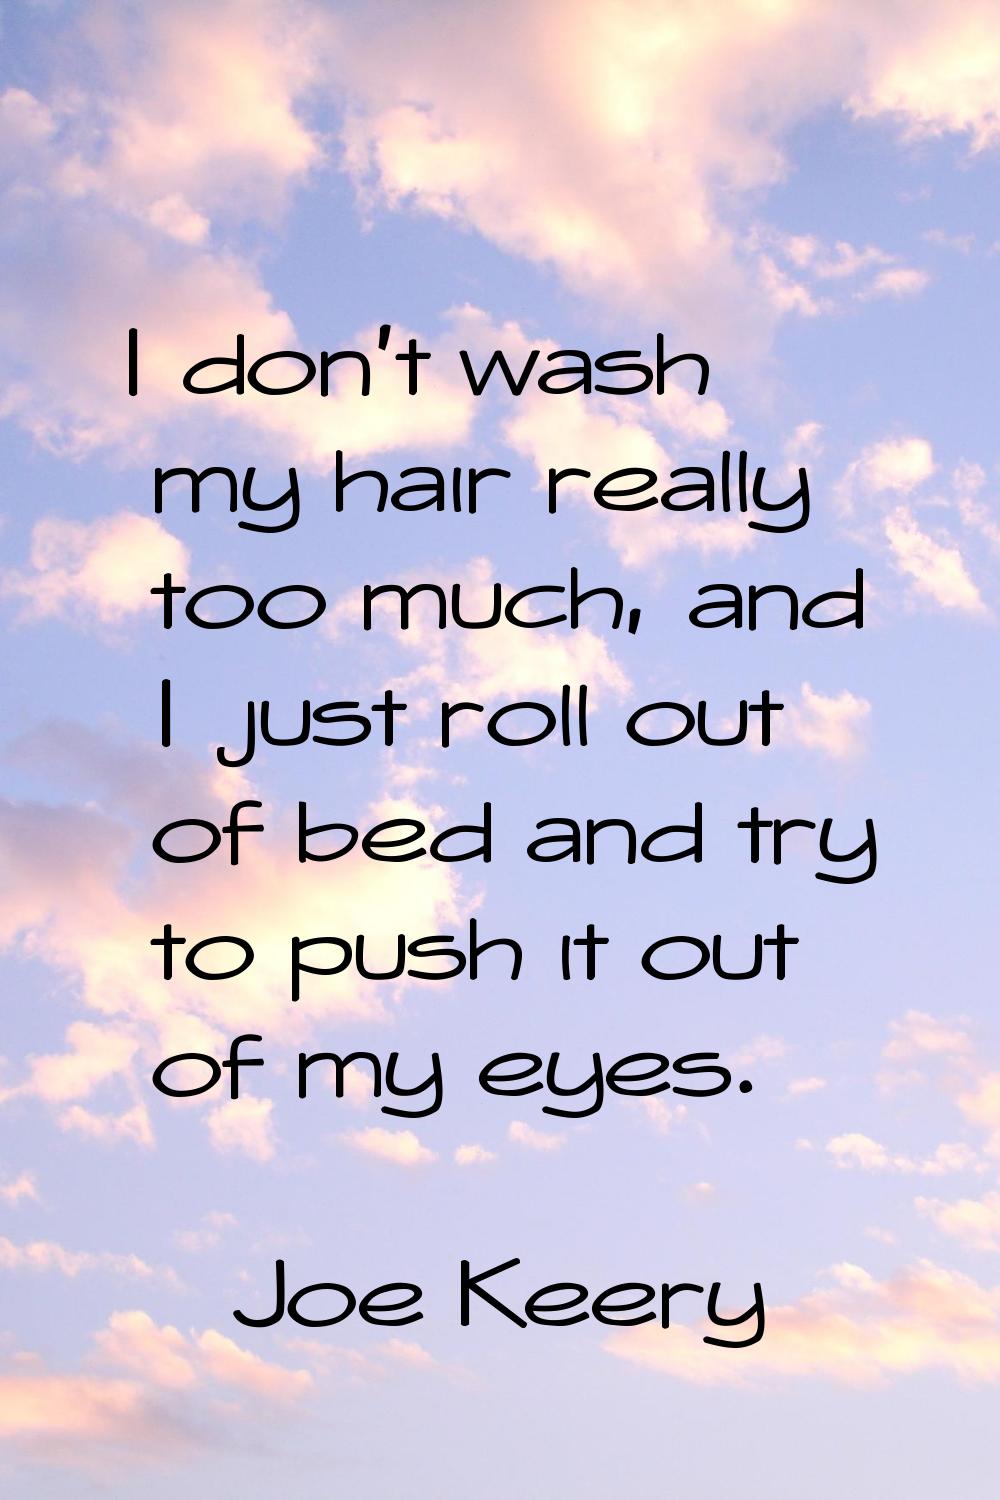 I don't wash my hair really too much, and I just roll out of bed and try to push it out of my eyes.